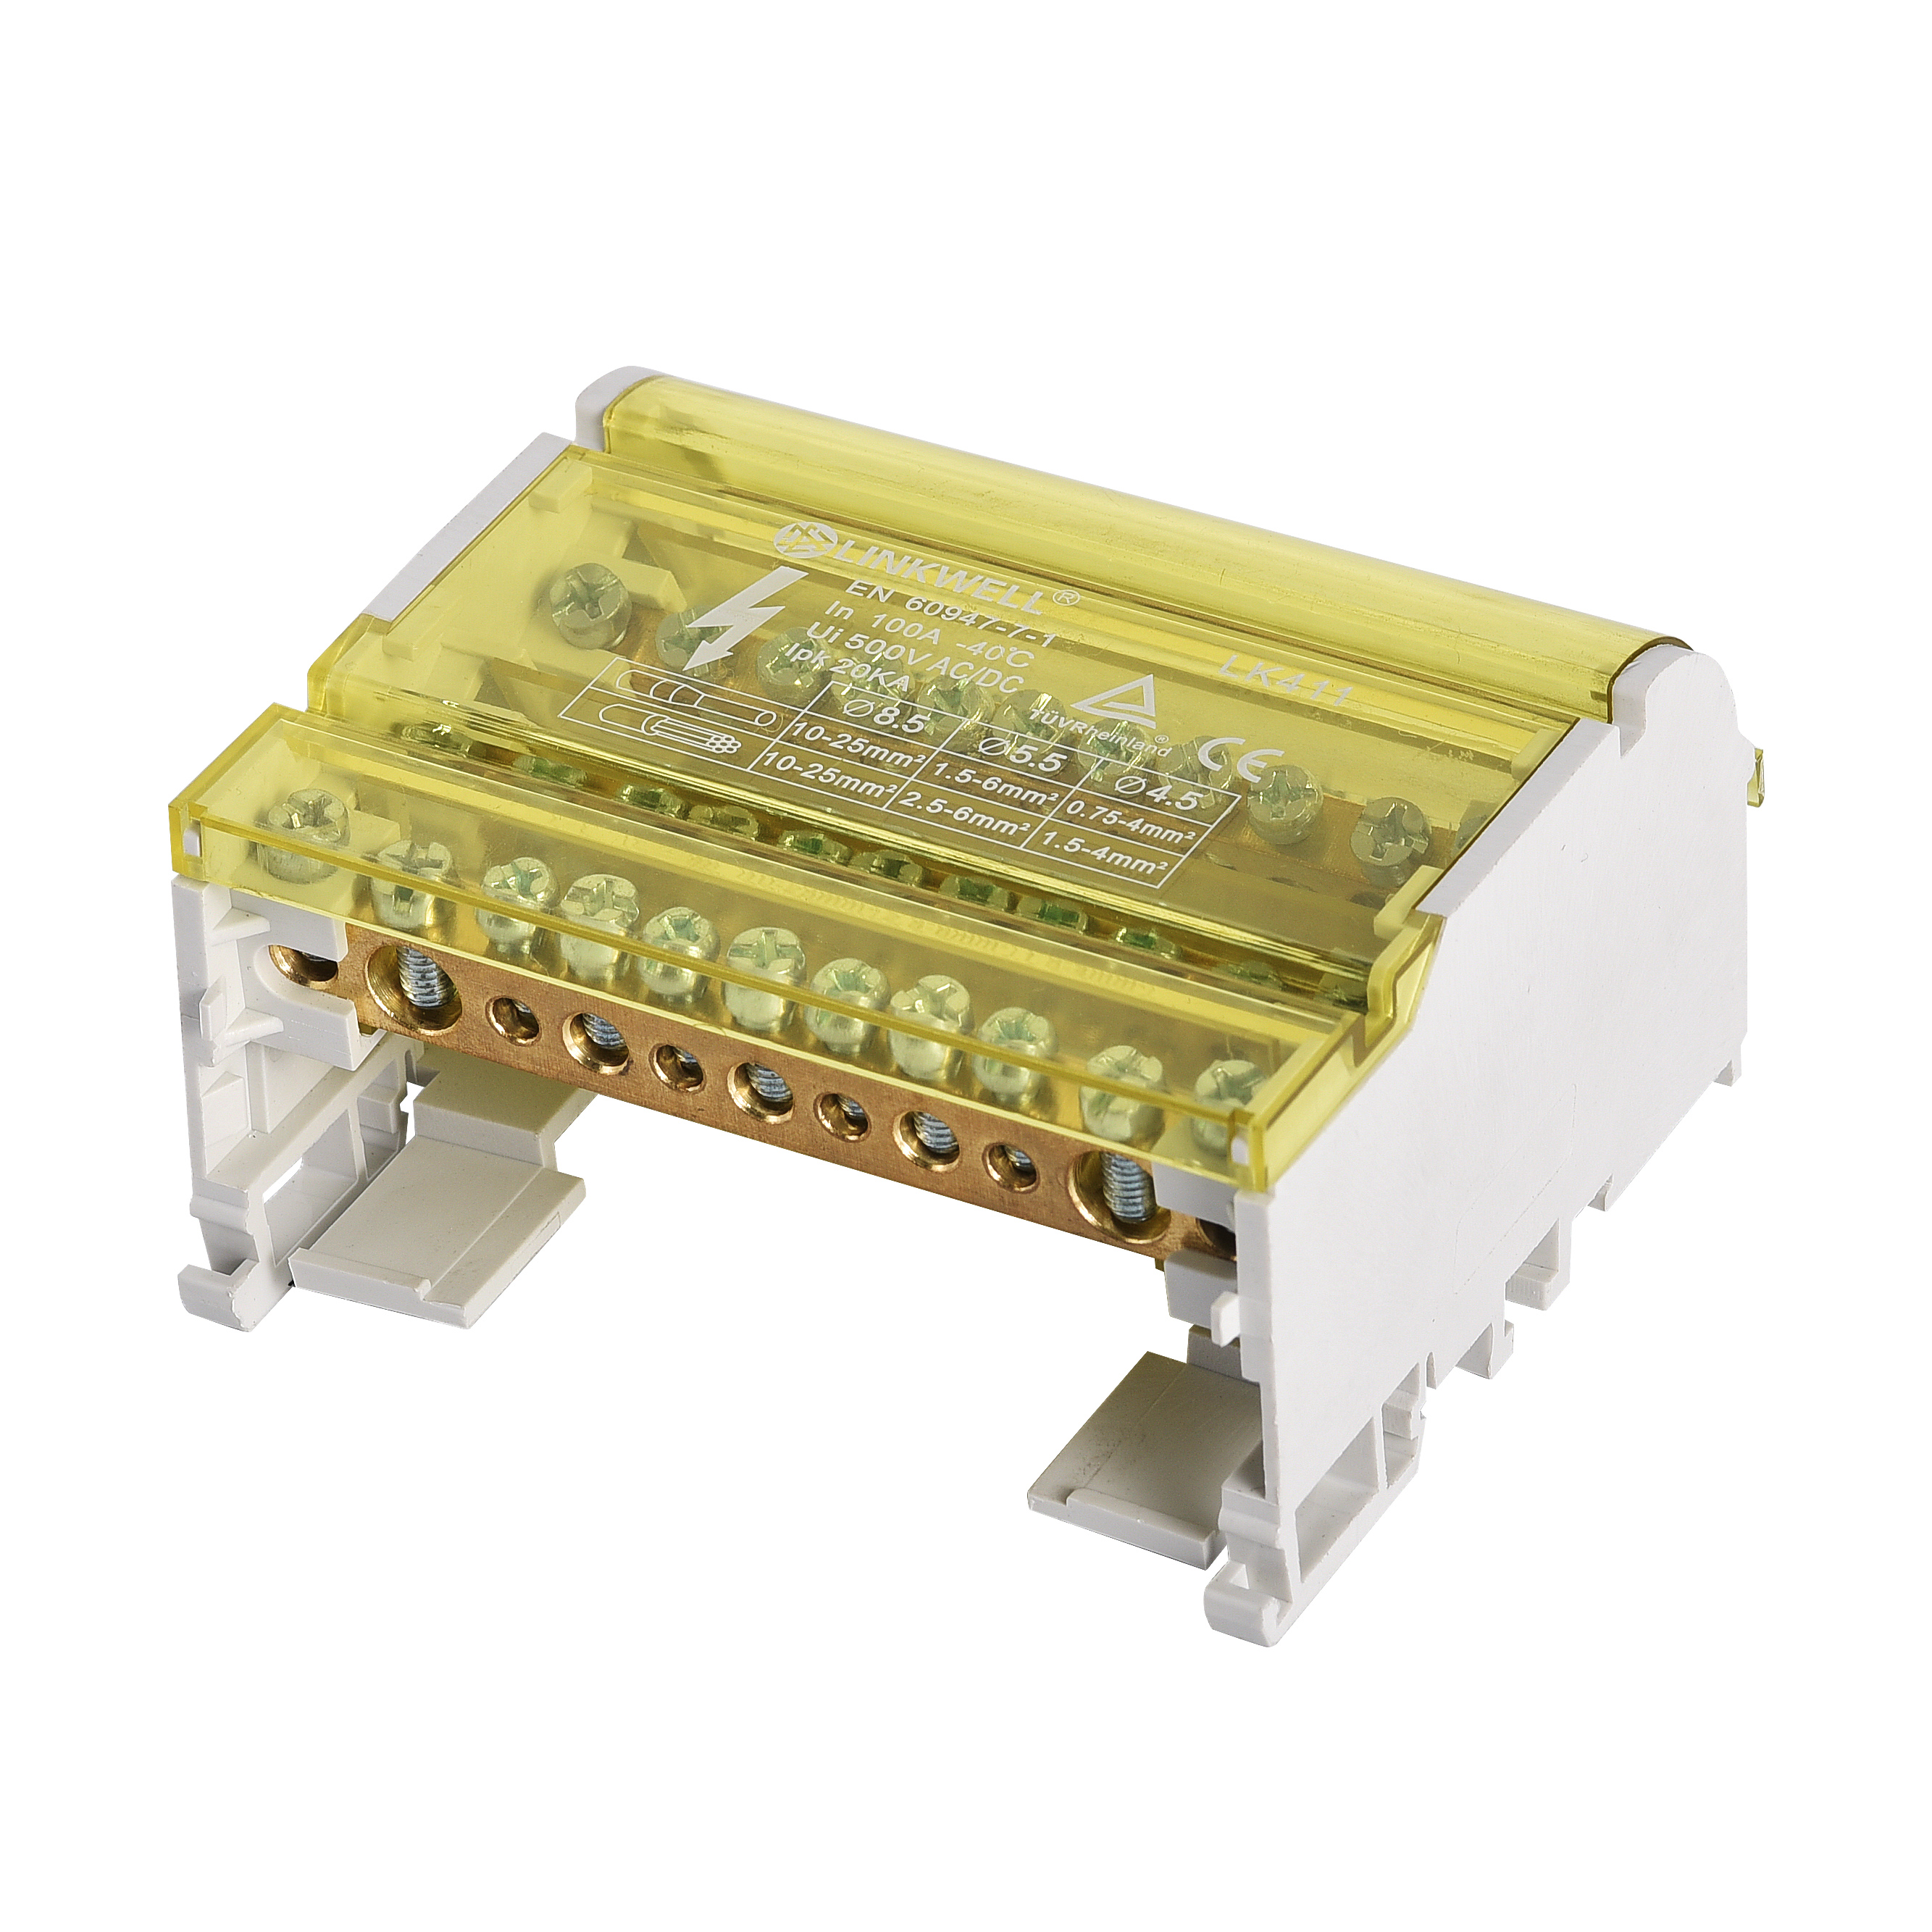 One-in-multiple-out UL94 cabinet terminal block junction box